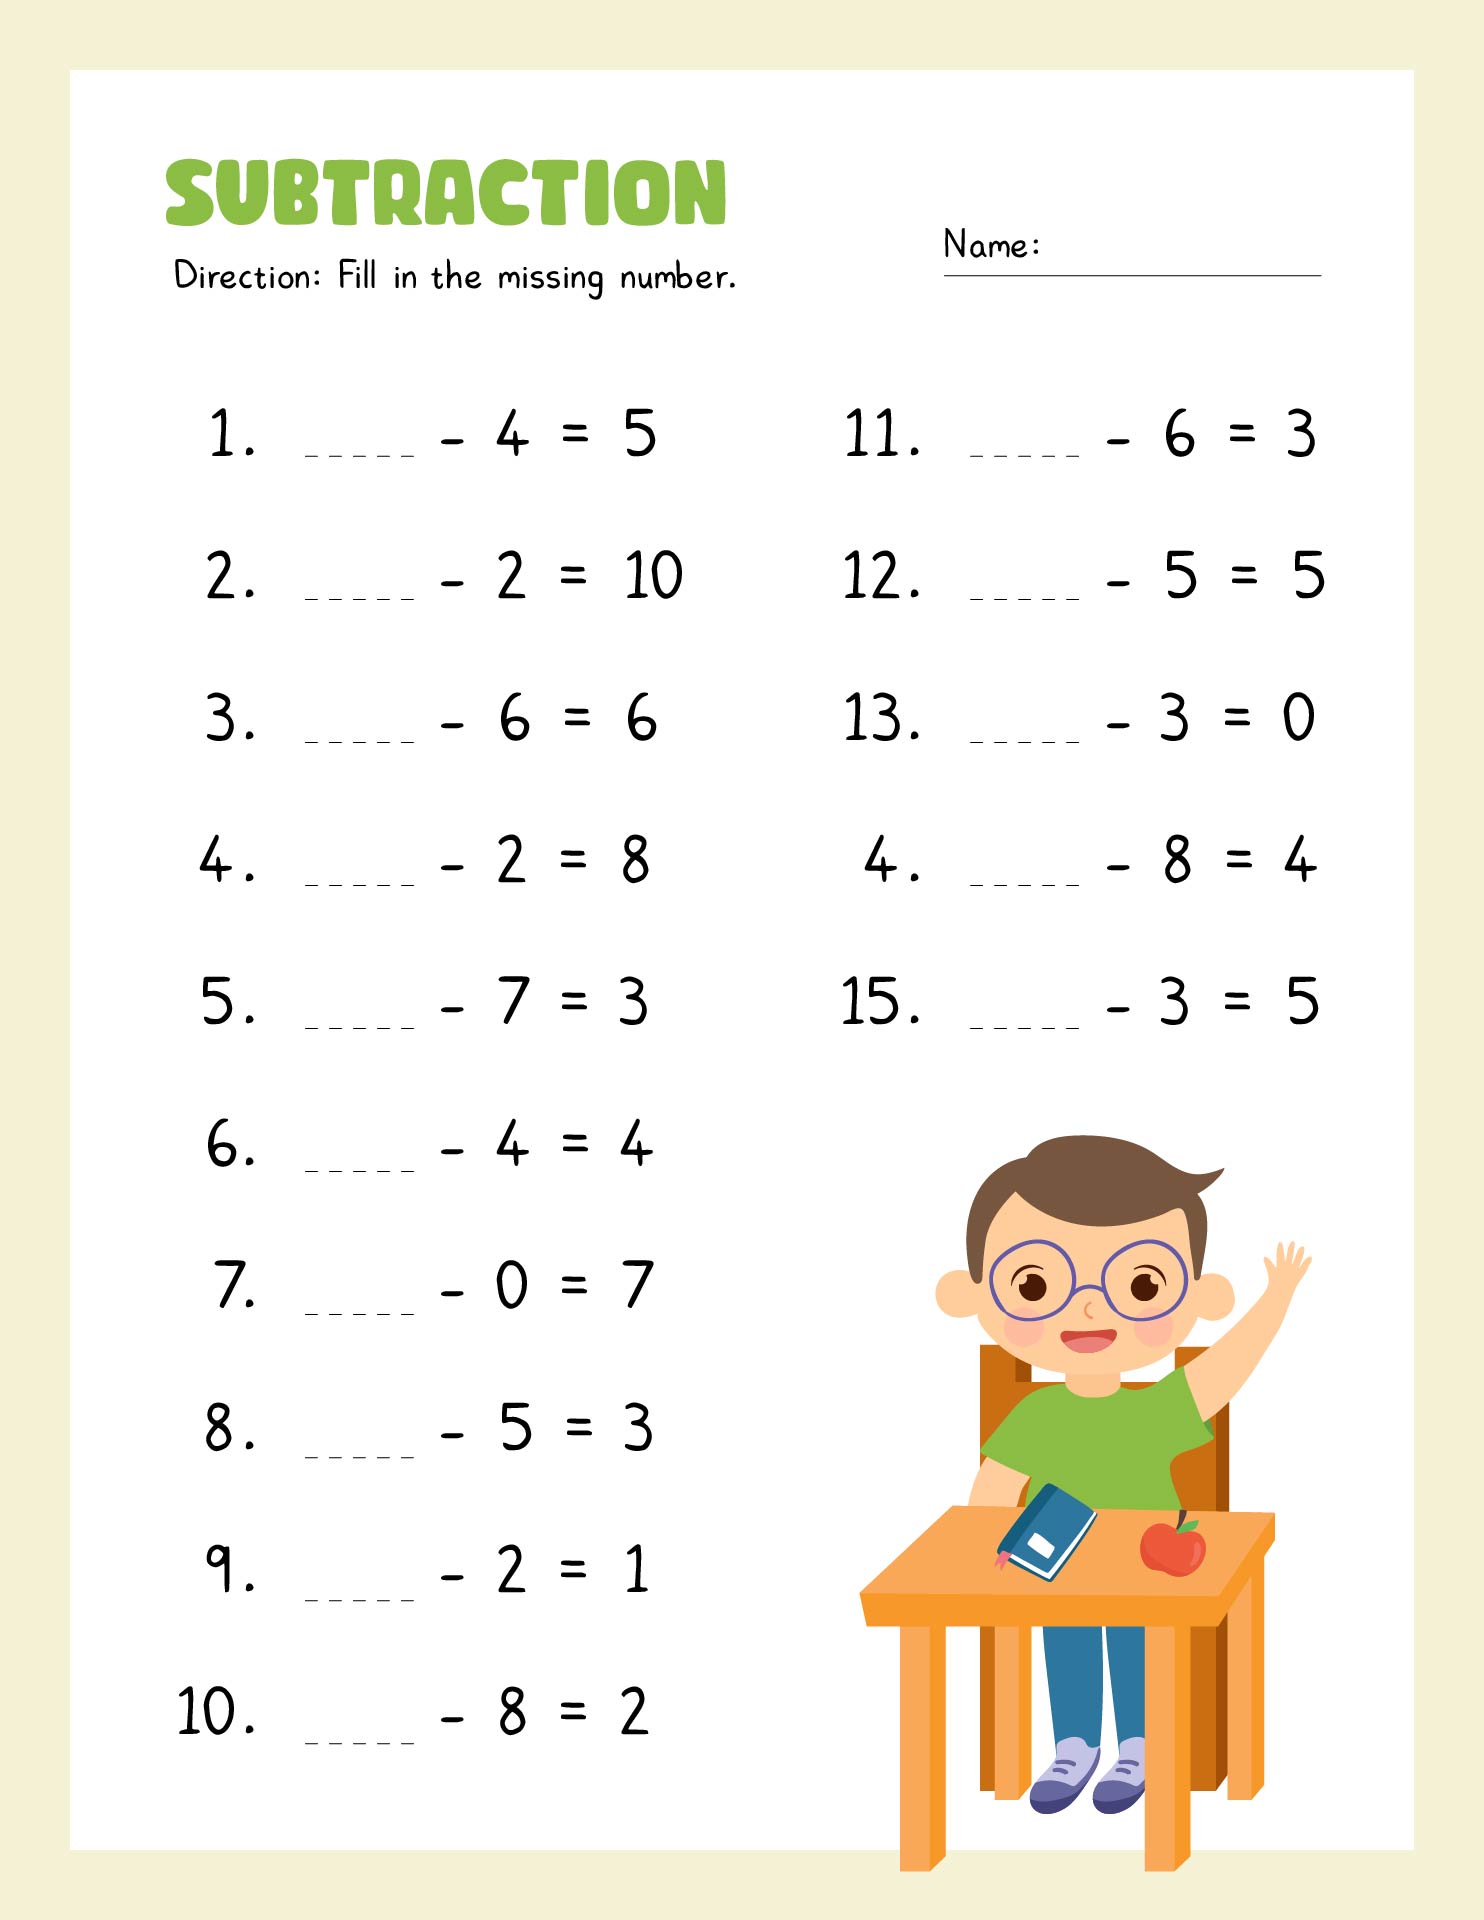 subtraction-facts-worksheets-1st-grade-free-1st-grade-subtraction